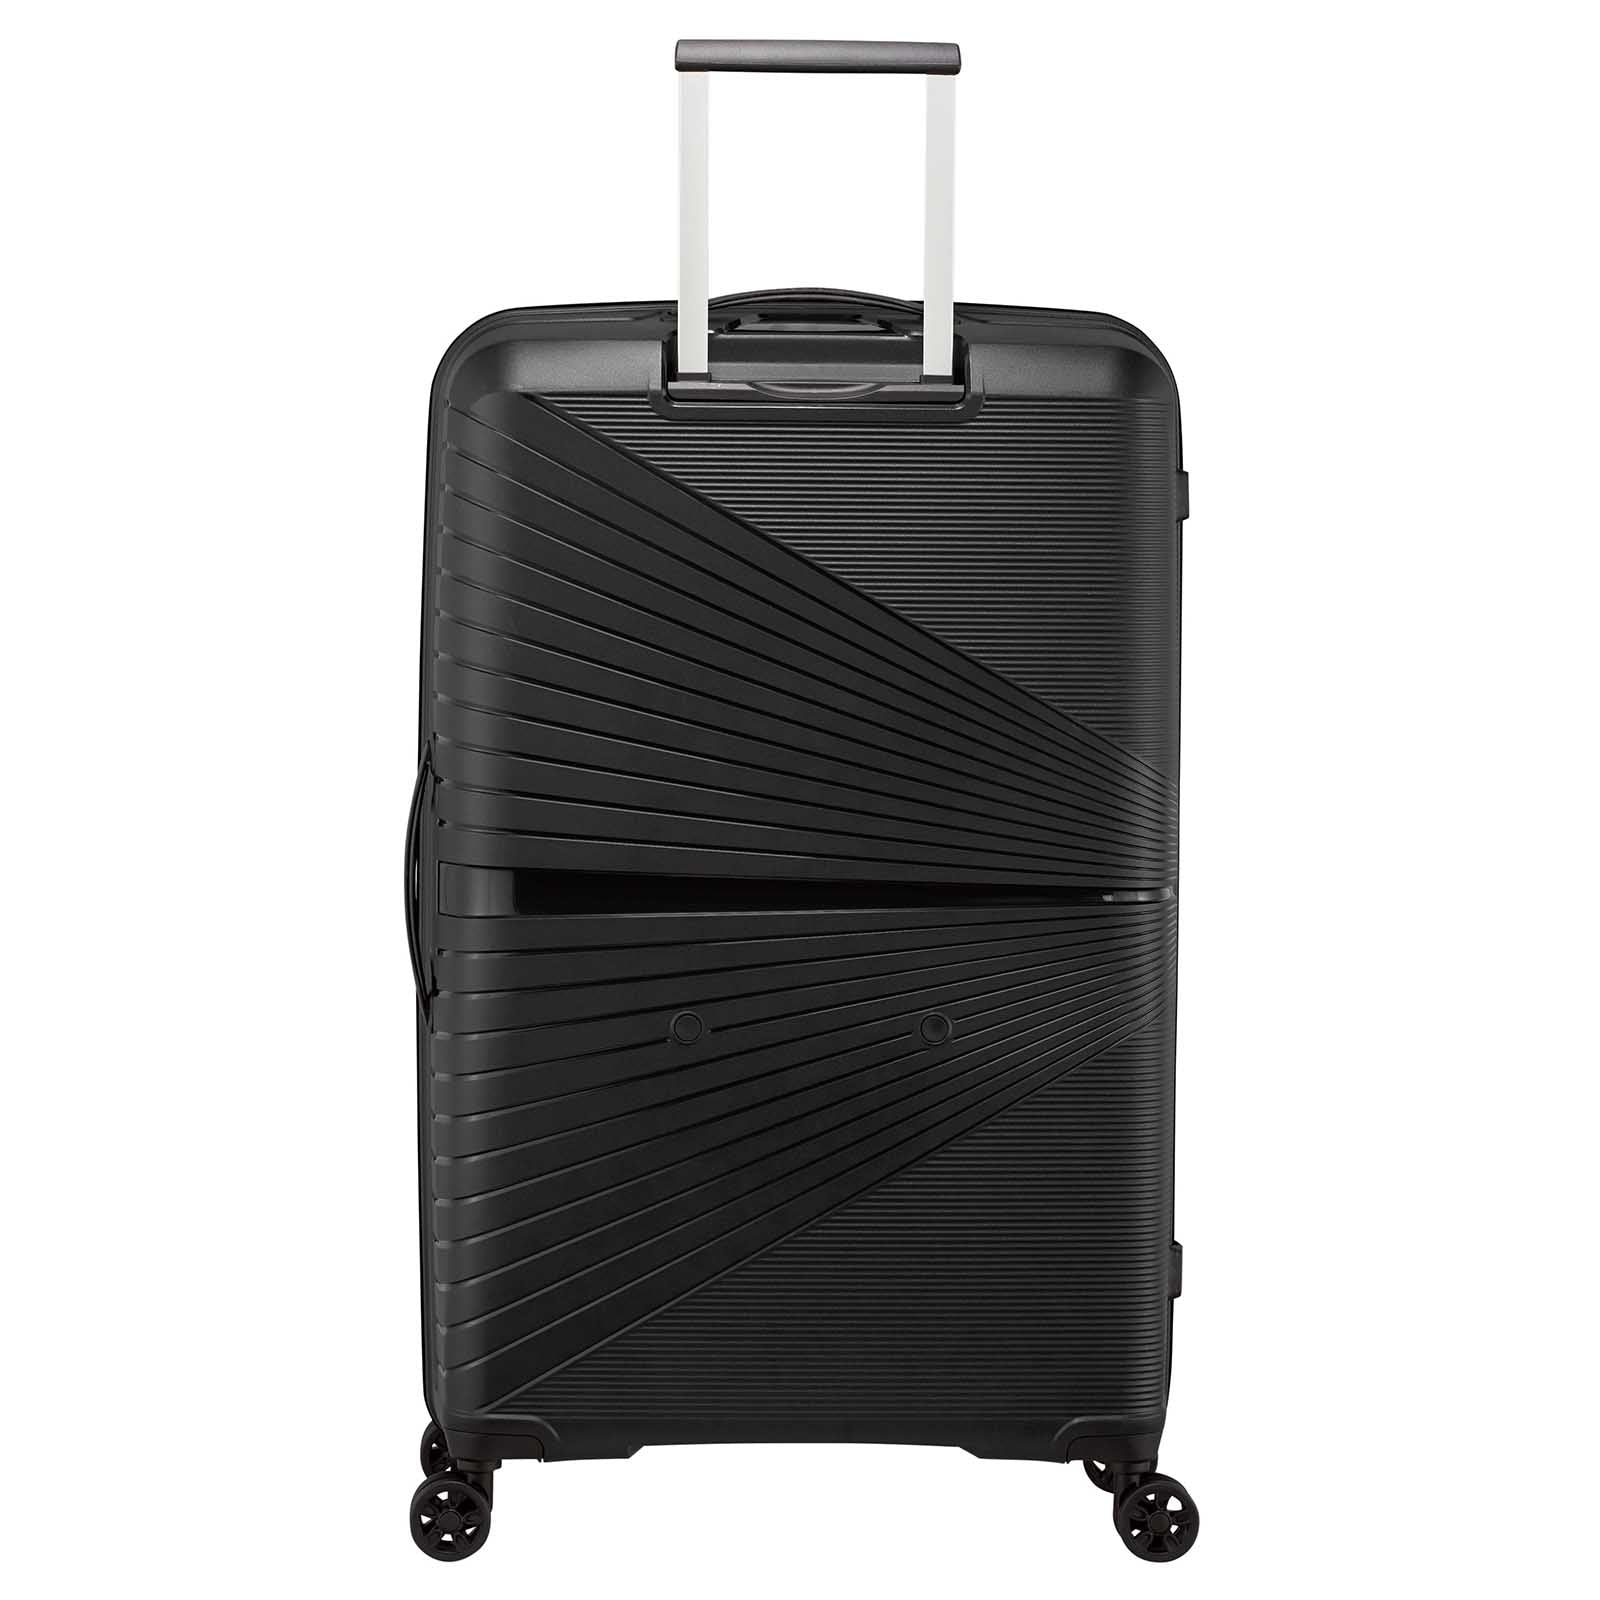 American-Tourister-Airconic-77cm-Suitcase-Onyx-Black-Back